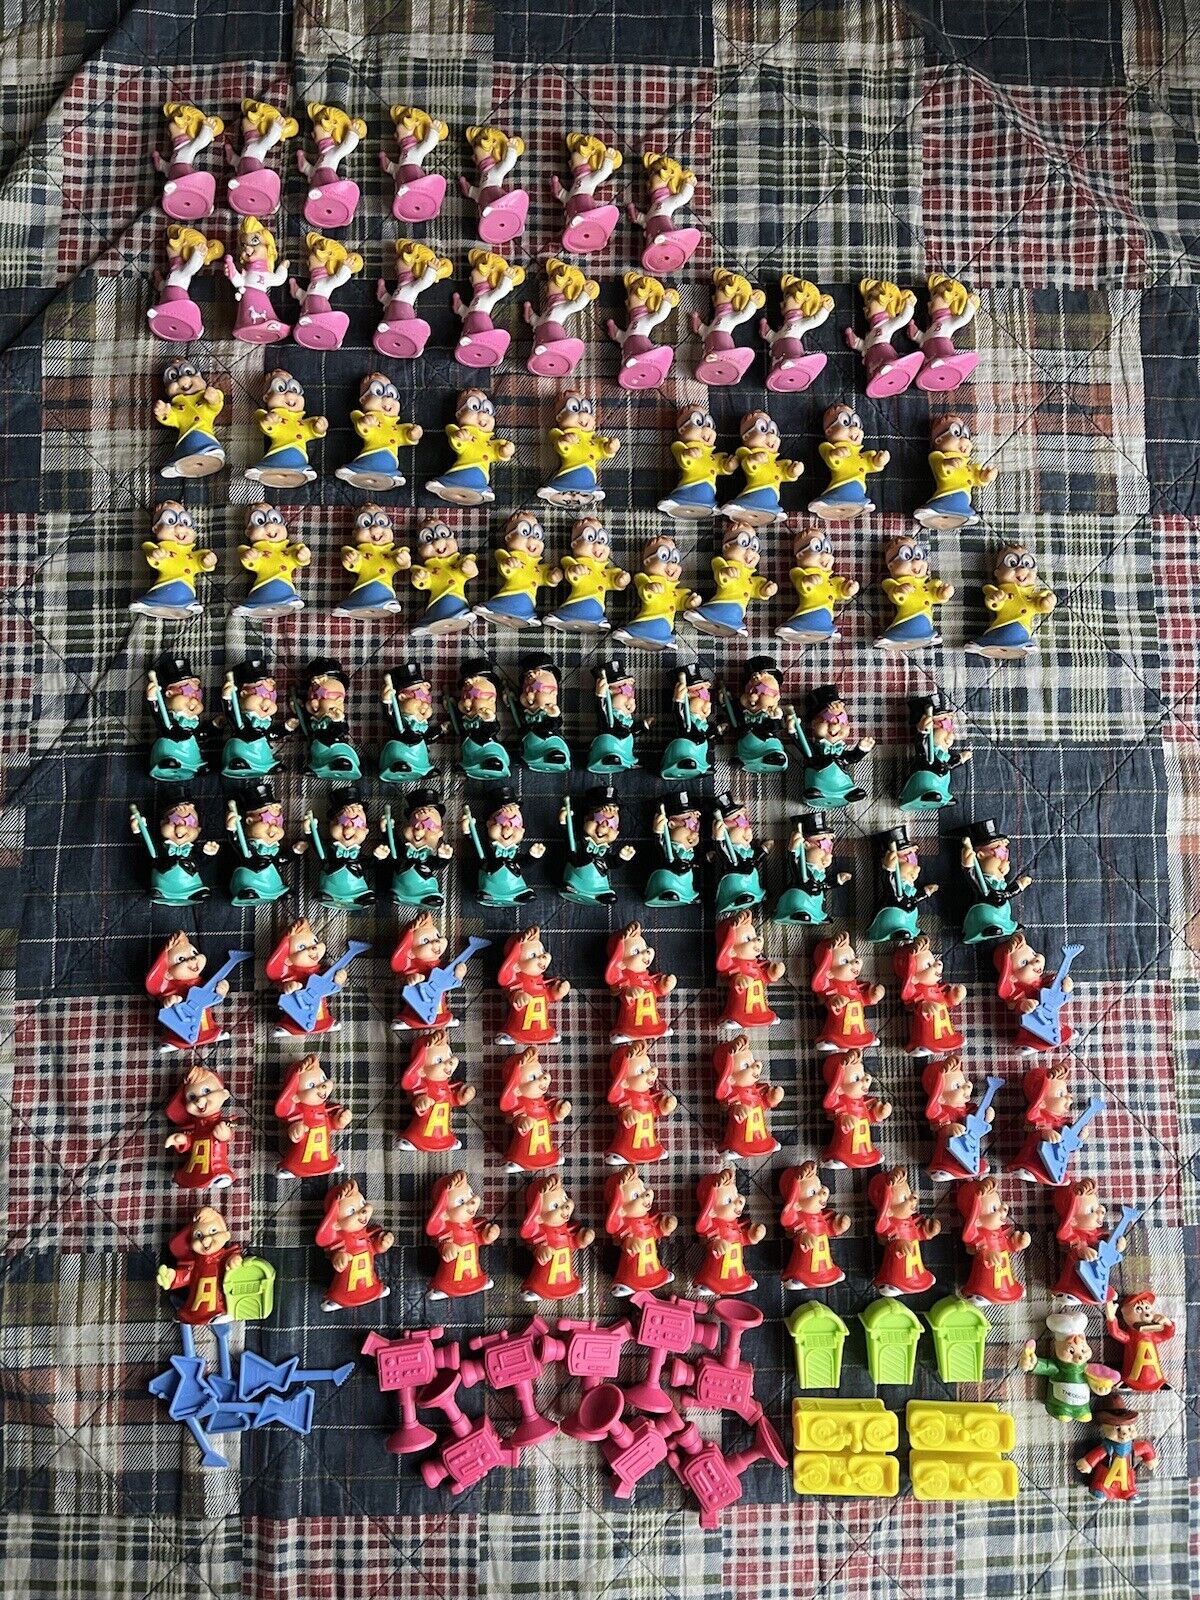 Large Lot of Alvin and the Chipmunks Figures with Accessories